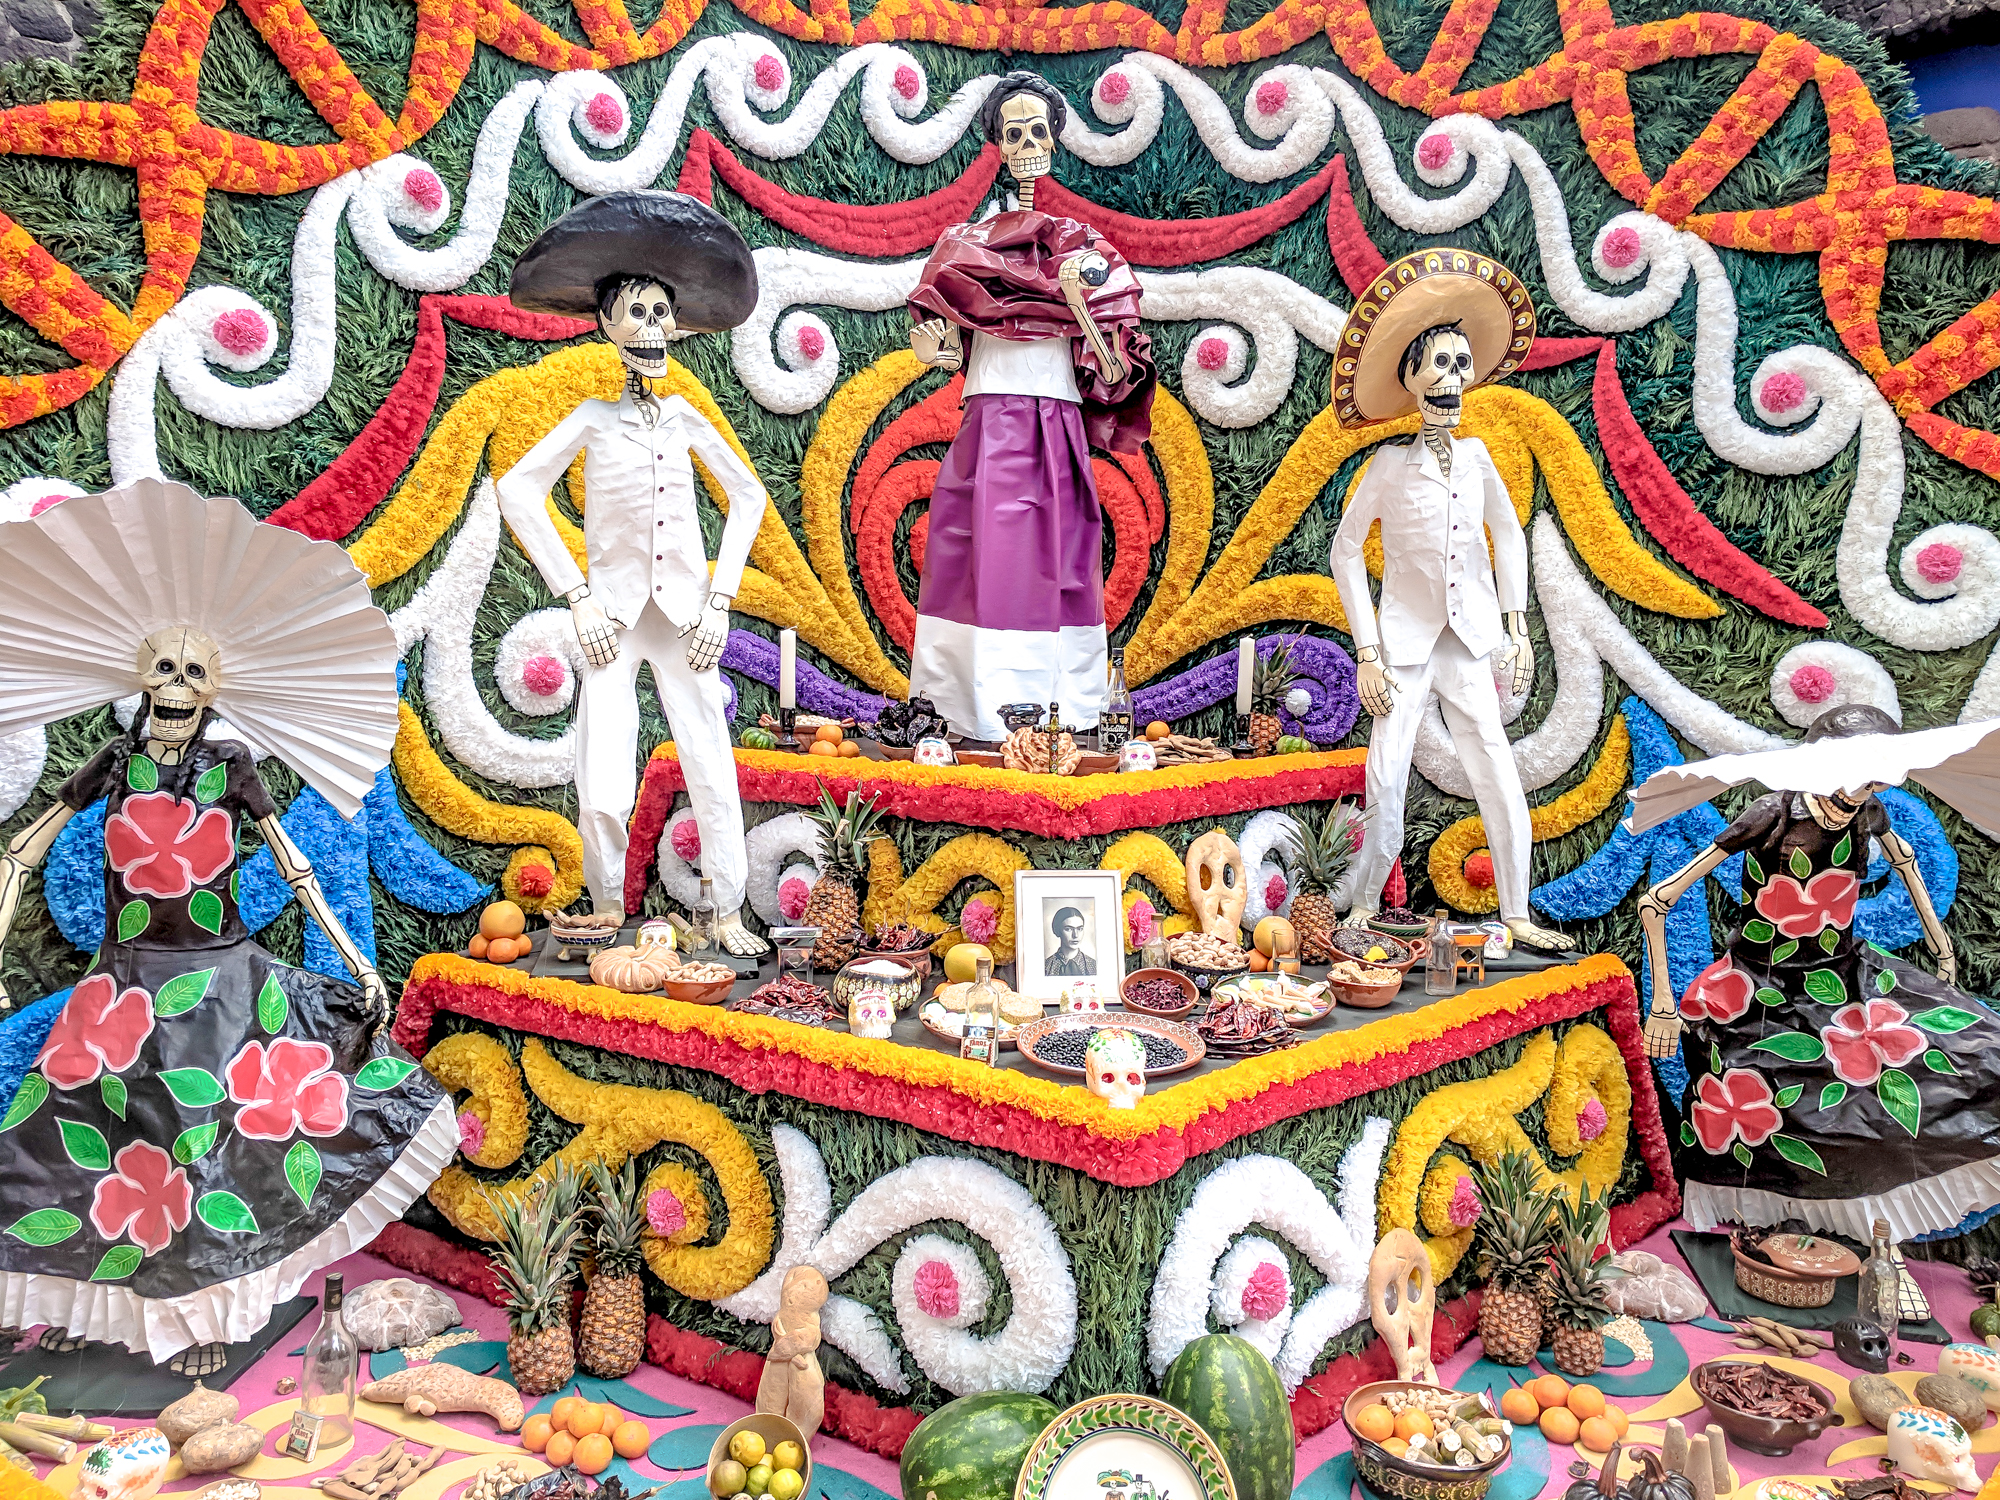 Remembering lost loved ones in Oaxaca on Mexico's Day of the Dead holiday, Arts and Culture